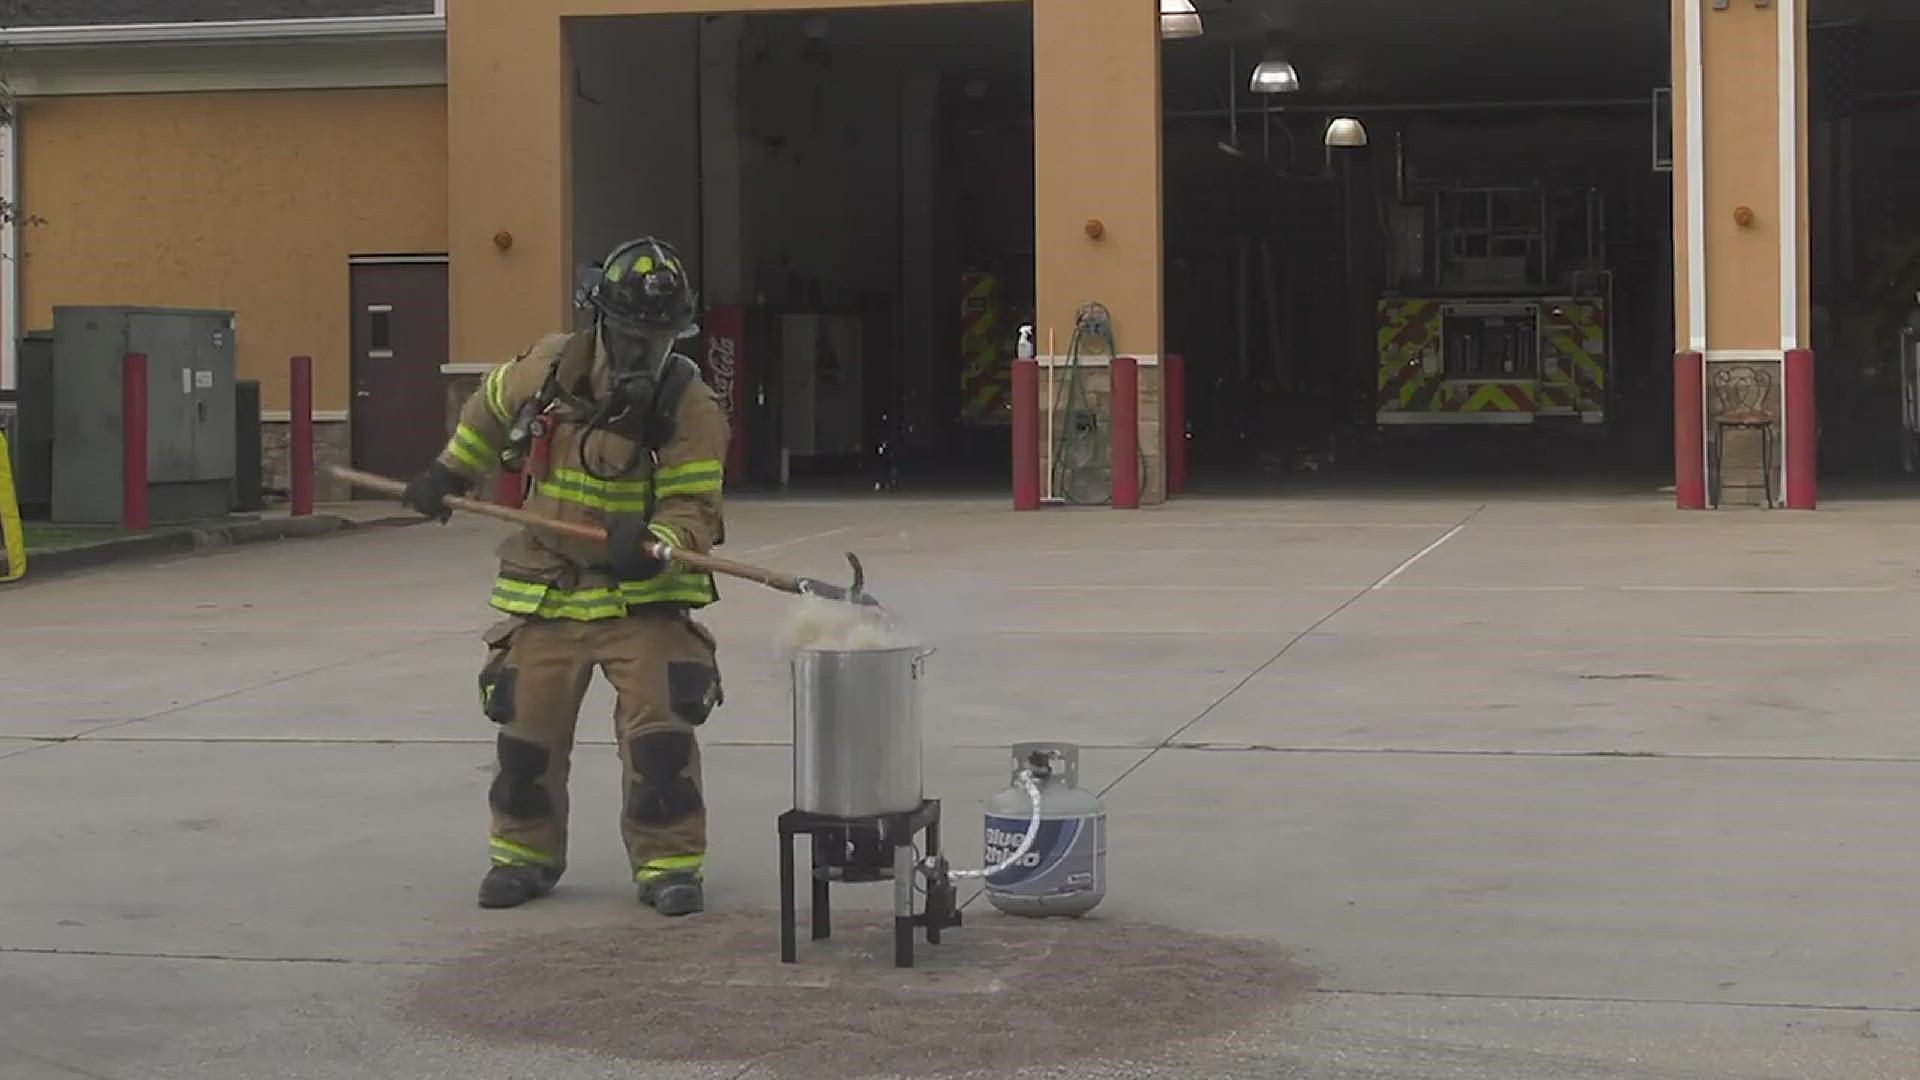 Be sure to follow safety tips if you plan to fry a turkey this holiday season. The Jacksonville Fire and Rescue Department shows how NOT to fry a turkey.